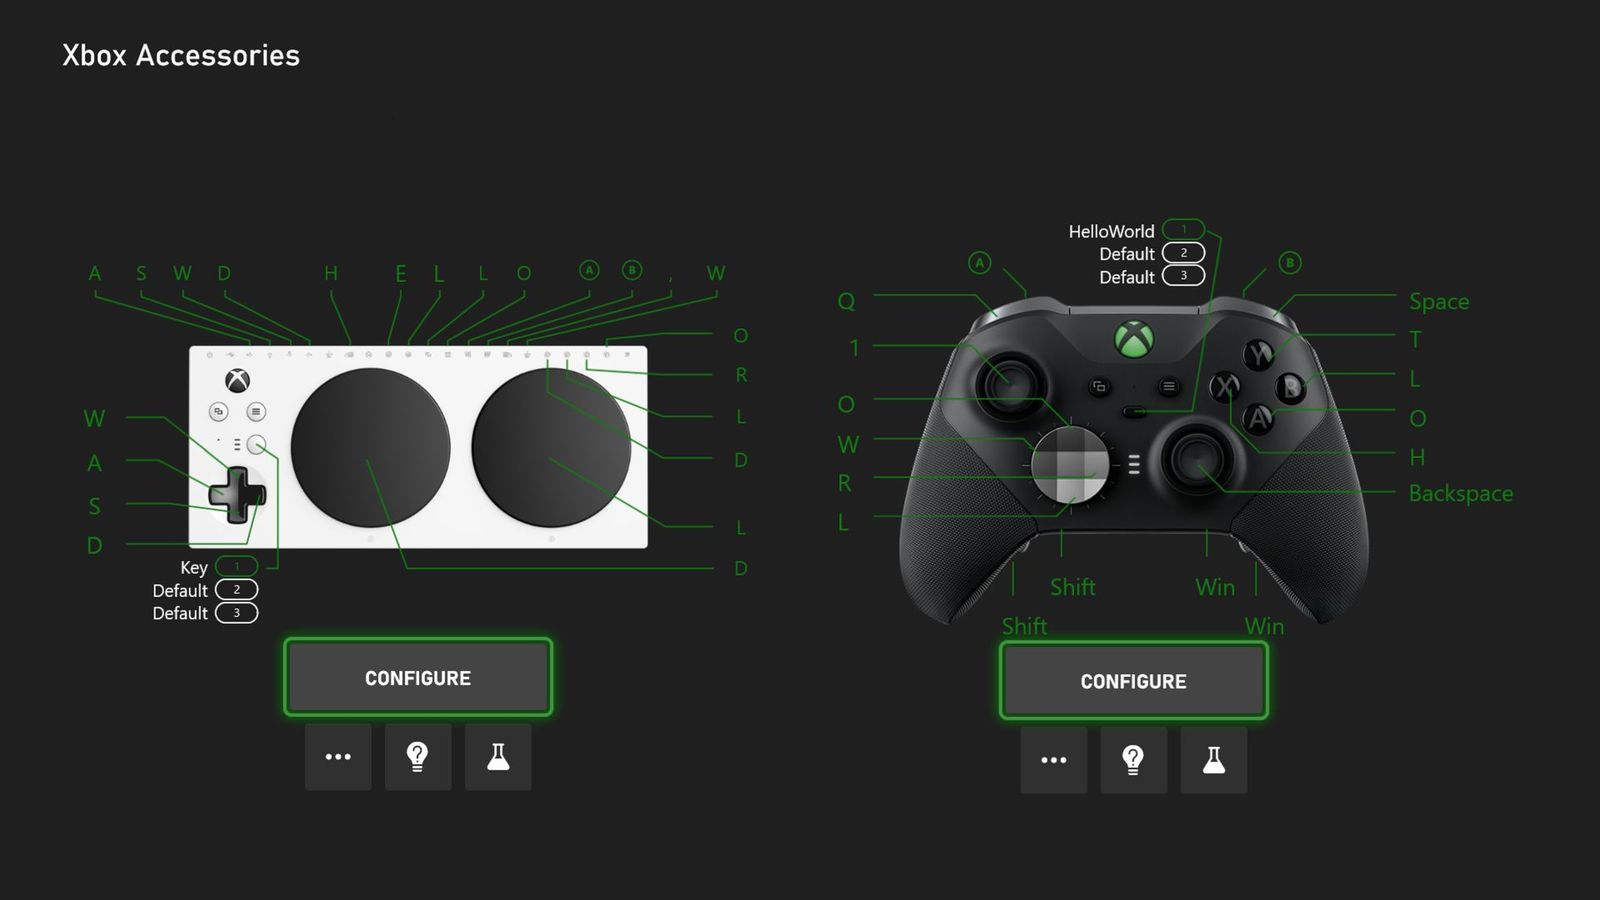 Xbox Cloud Gaming Support Rolling Out to Xbox One, Xbox Series S/X